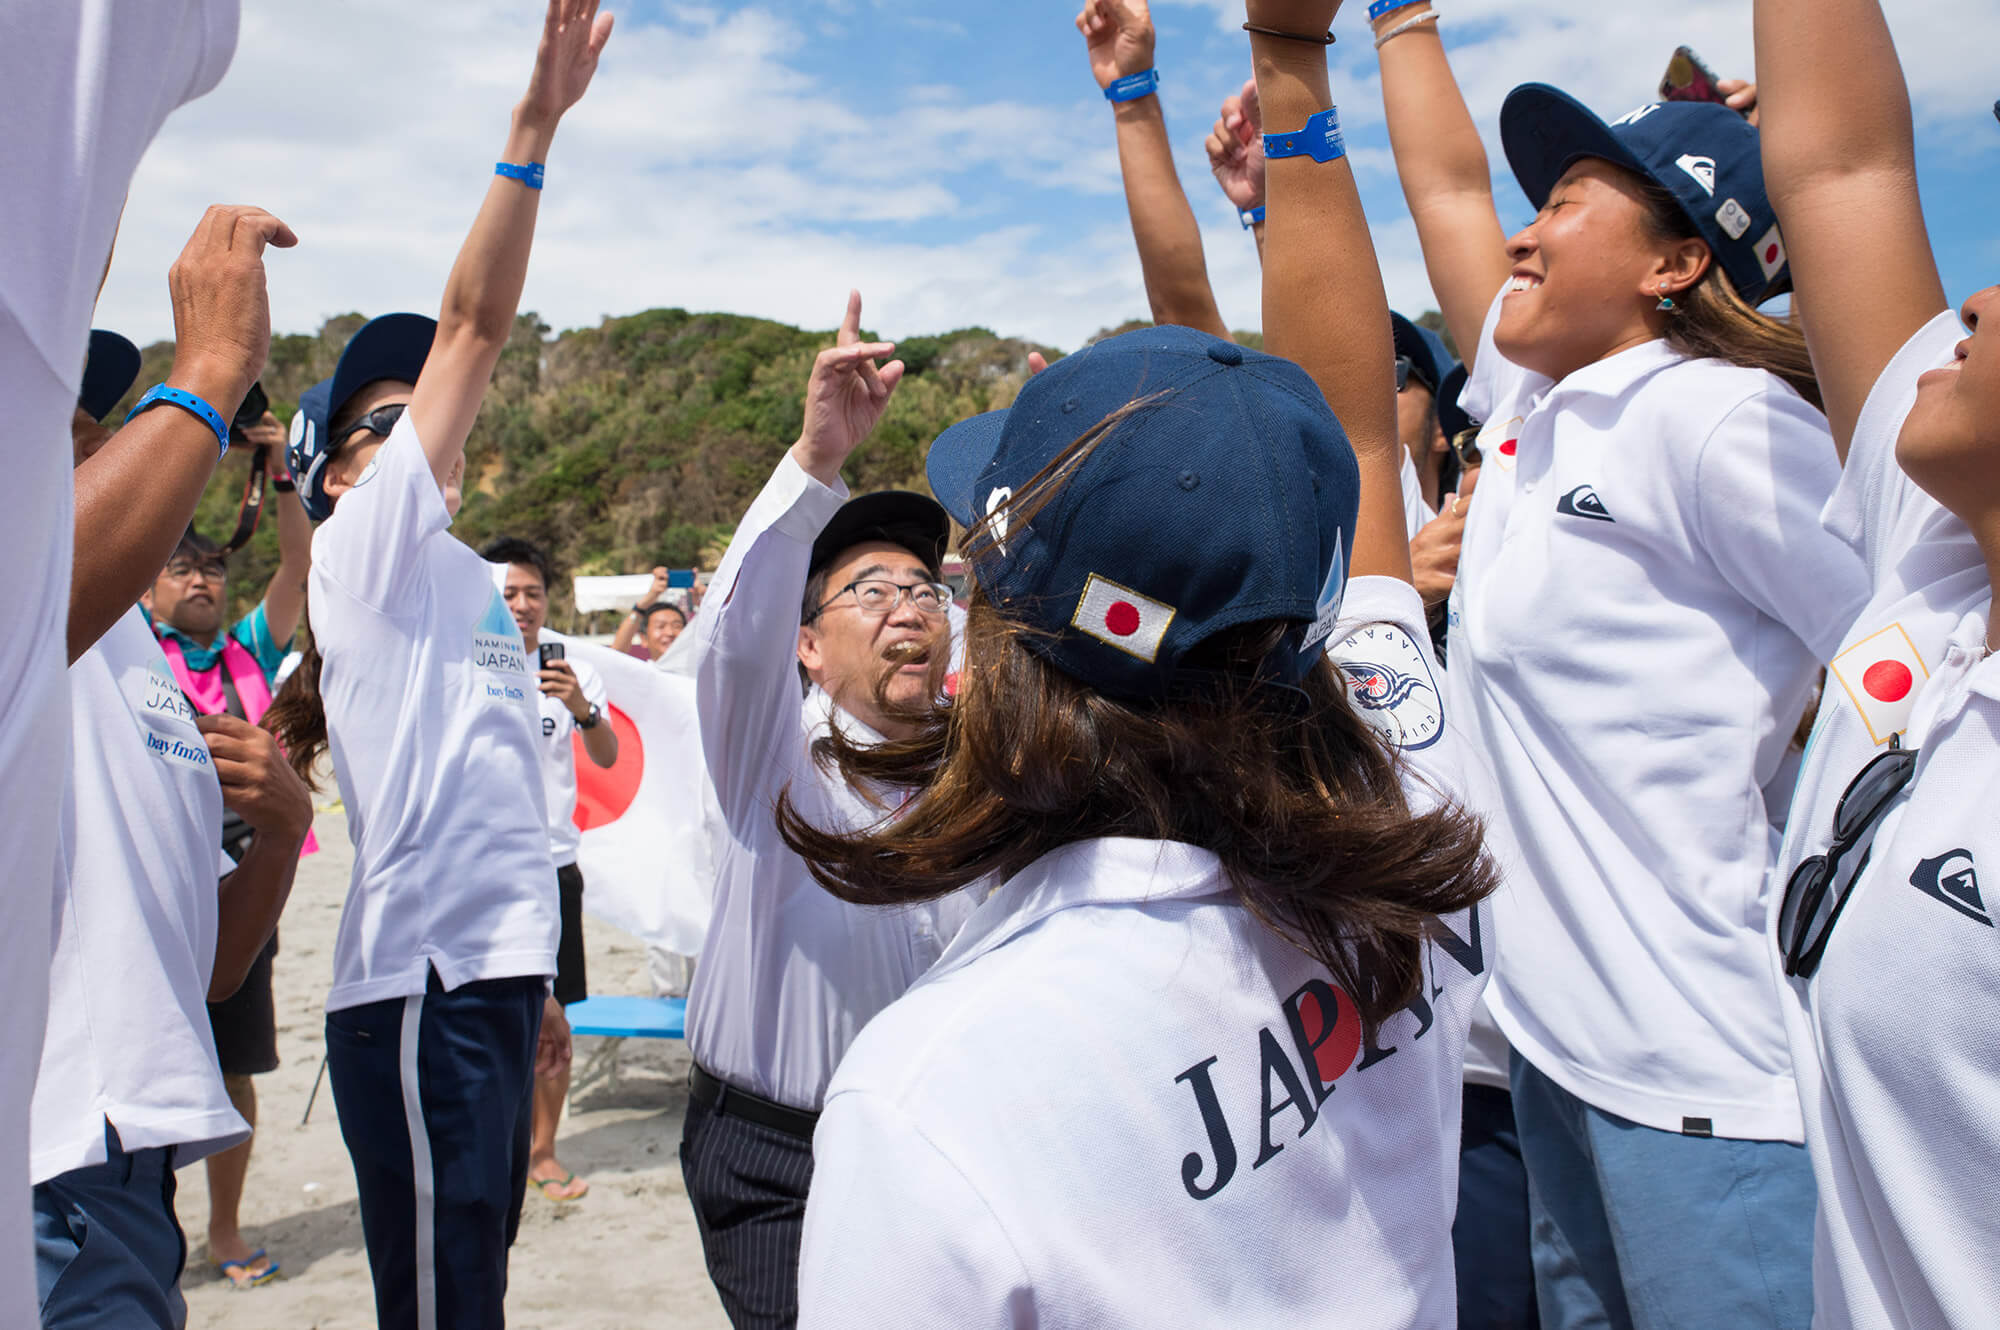 UR ISA World Surfing Games 2018 Japan's Victory